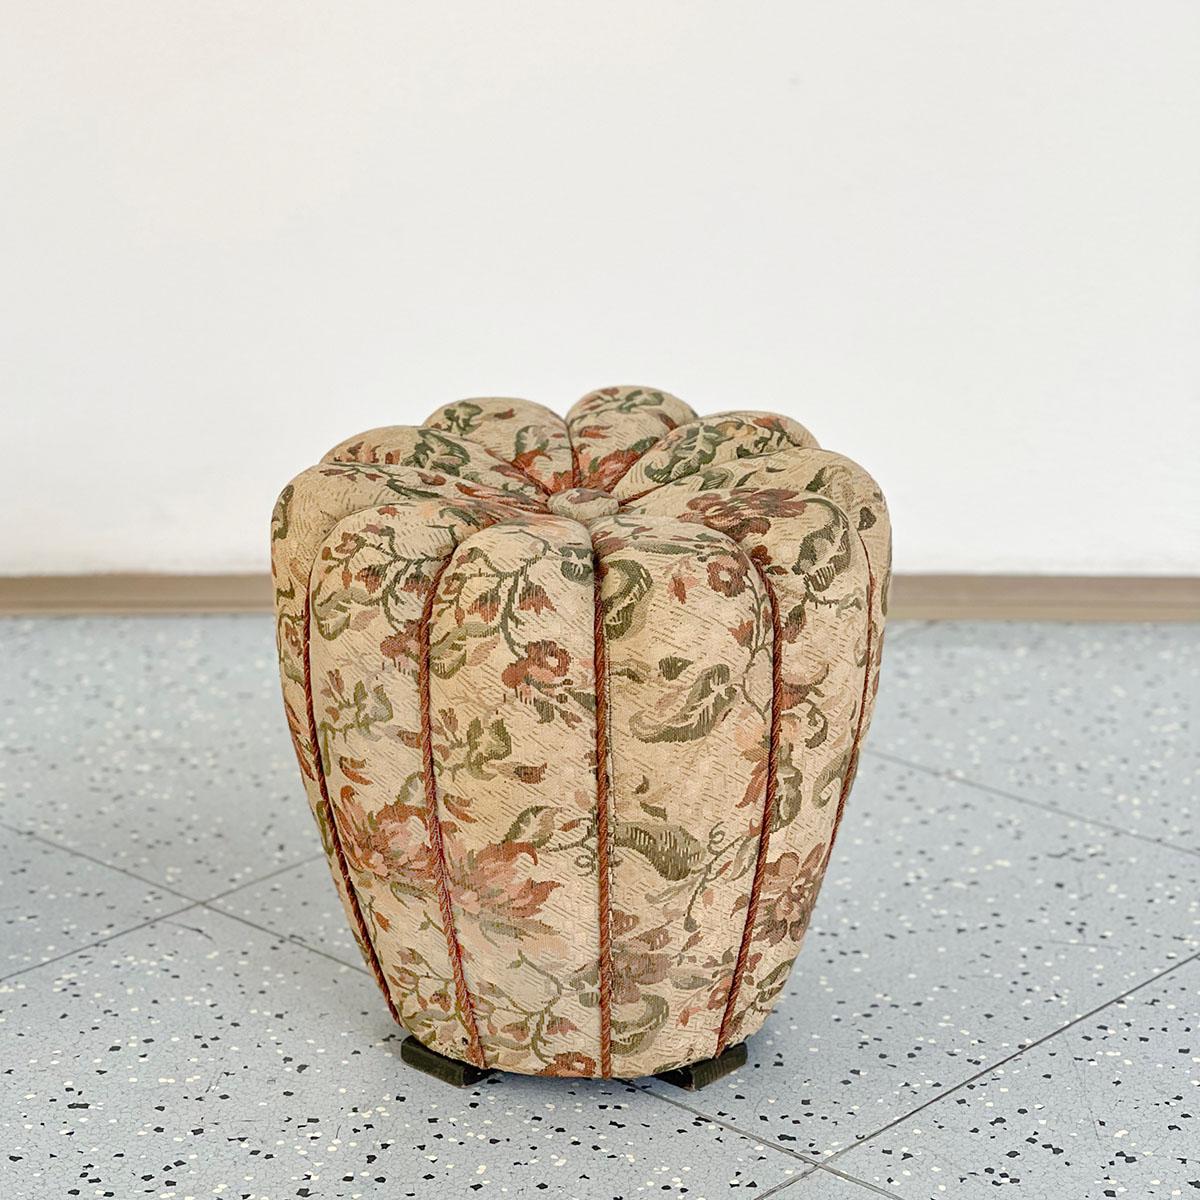 Stool in floral tapestry fabric and wood designed by Jindrich Halabala and manufactured by UP Závody in former Czechoslovakia, 1930s.

This elegant Art Deco stool was designed by Jindrich Halabala and manufactured by UP Závody in the 1930s. This